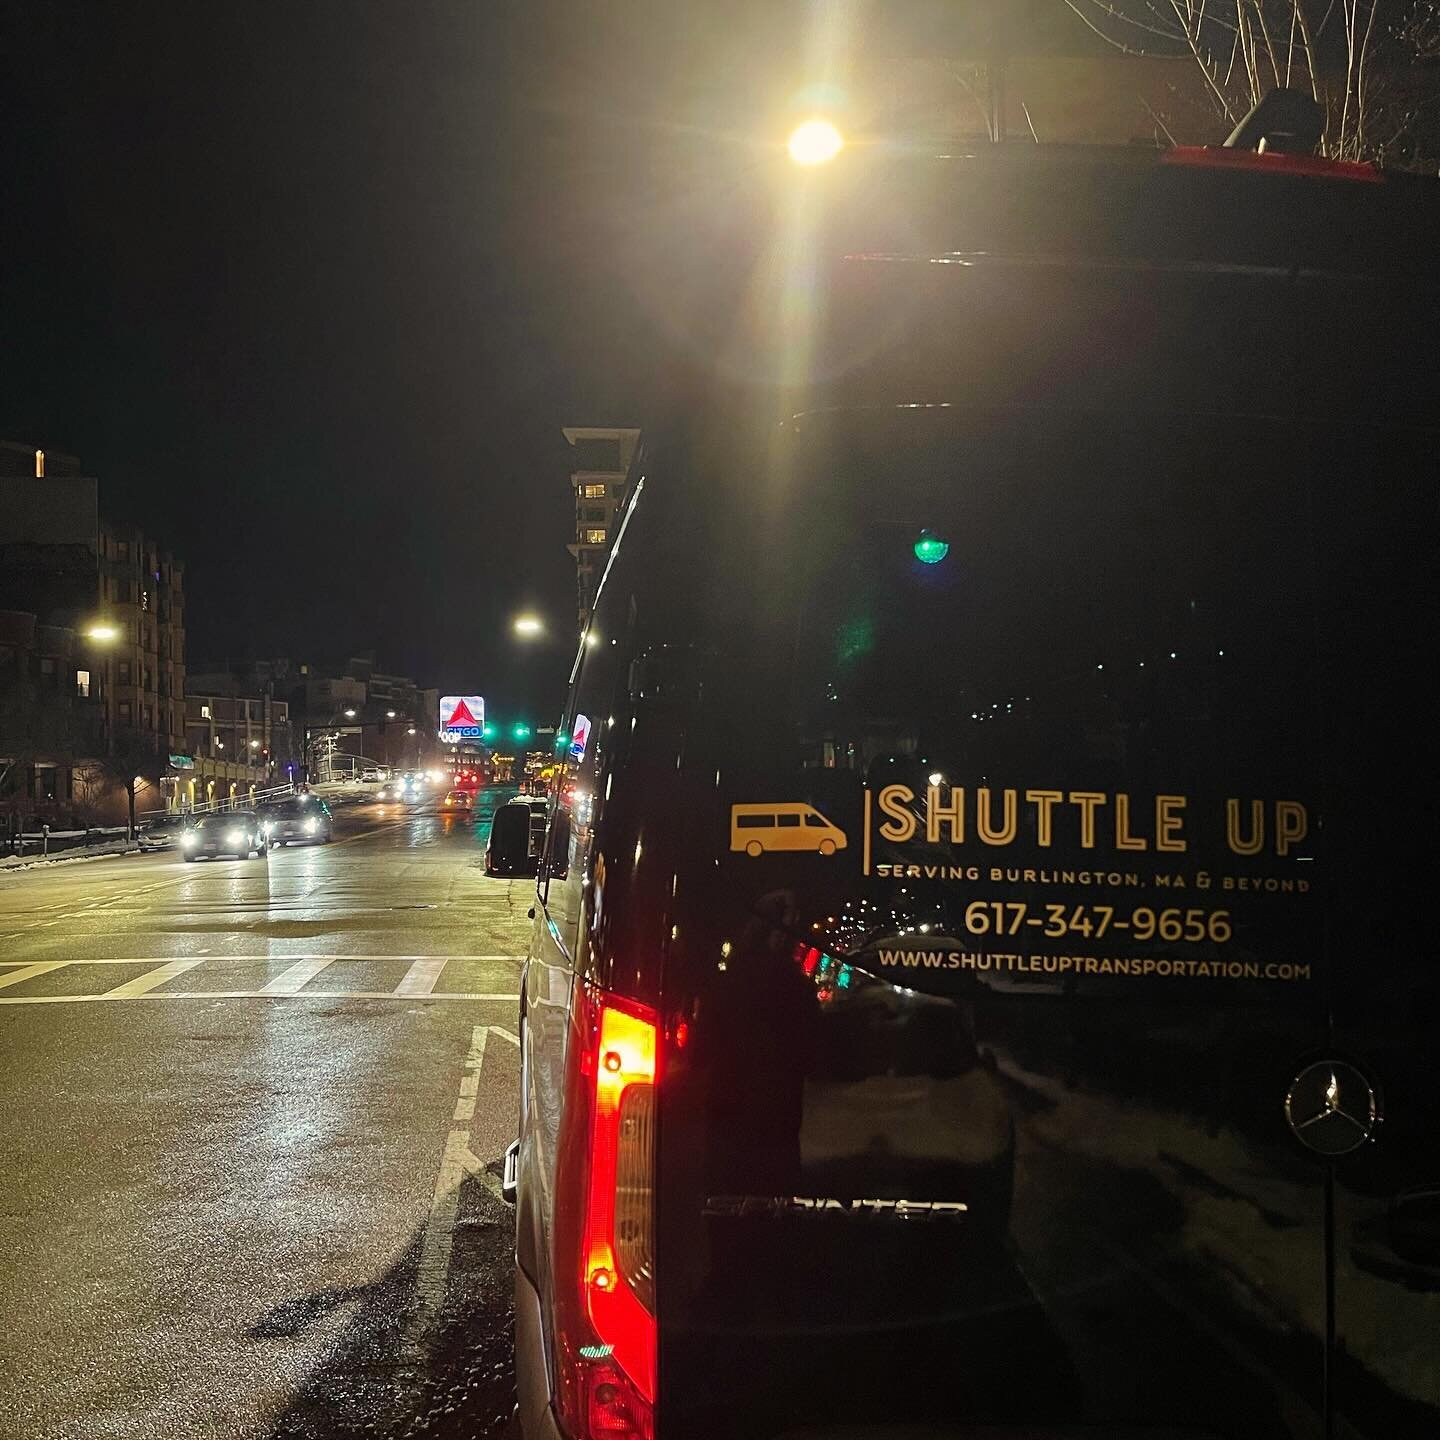 Last night at Kenmore Square. Dinner for 8. Thank you, Dave and company for choosing Shuttle Up. #shuttleuptransportation #boston